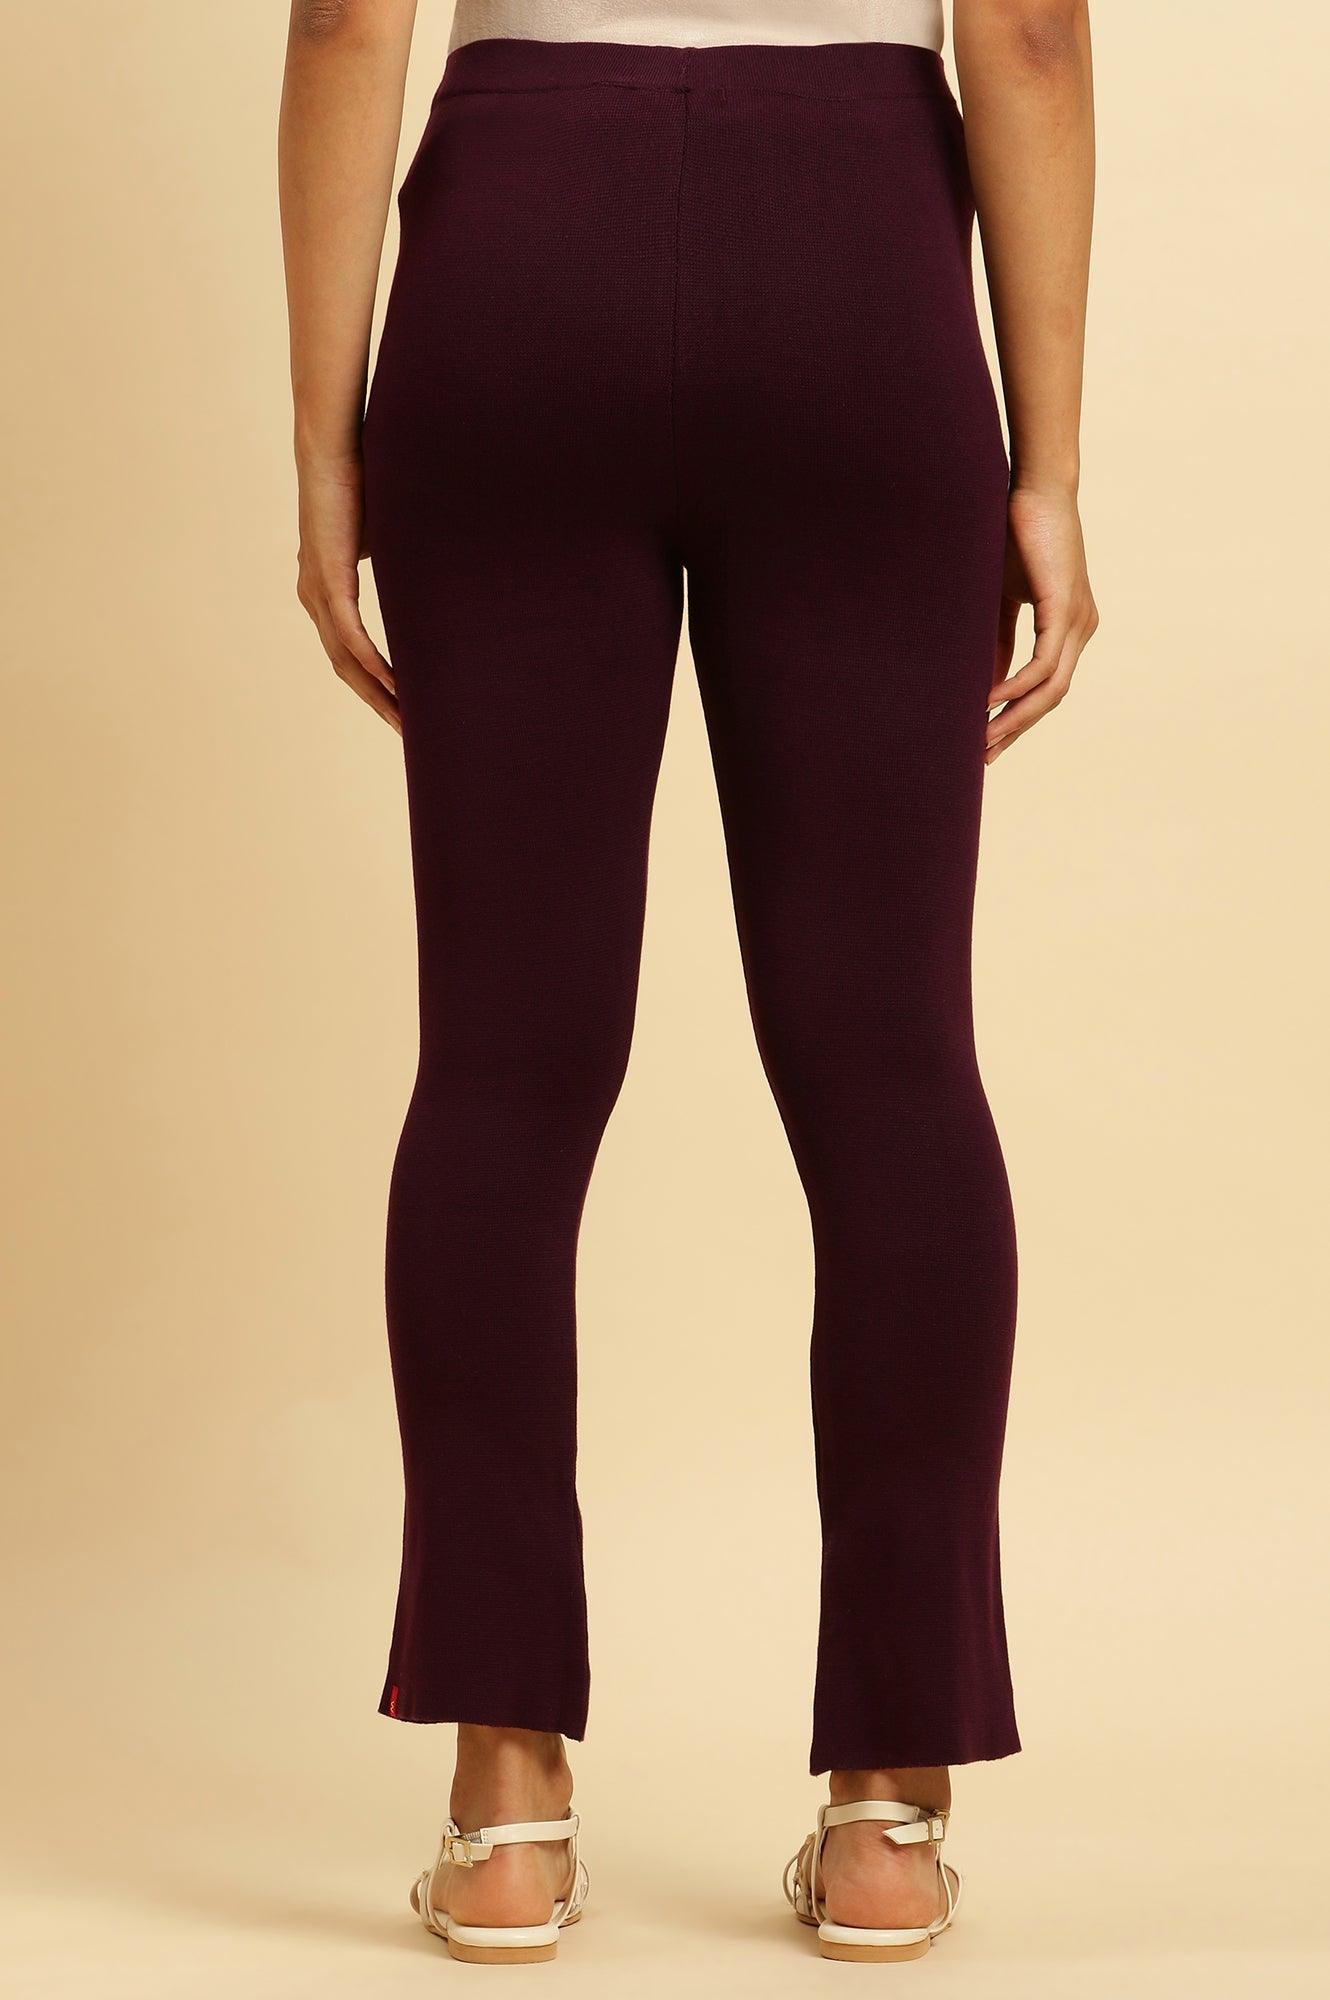 Purple Solid Fit And Flare Pants - wforwoman